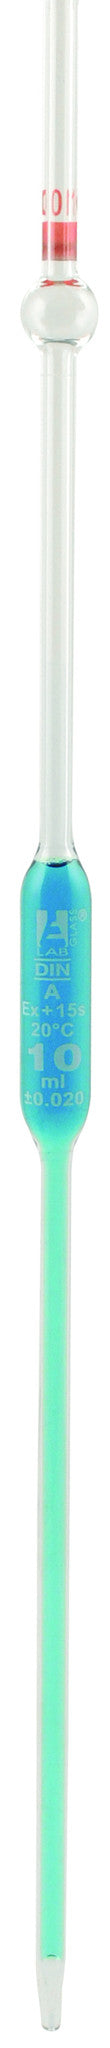 Pipettes Class - B with Safety Bulb, 10 ml, White Graduation